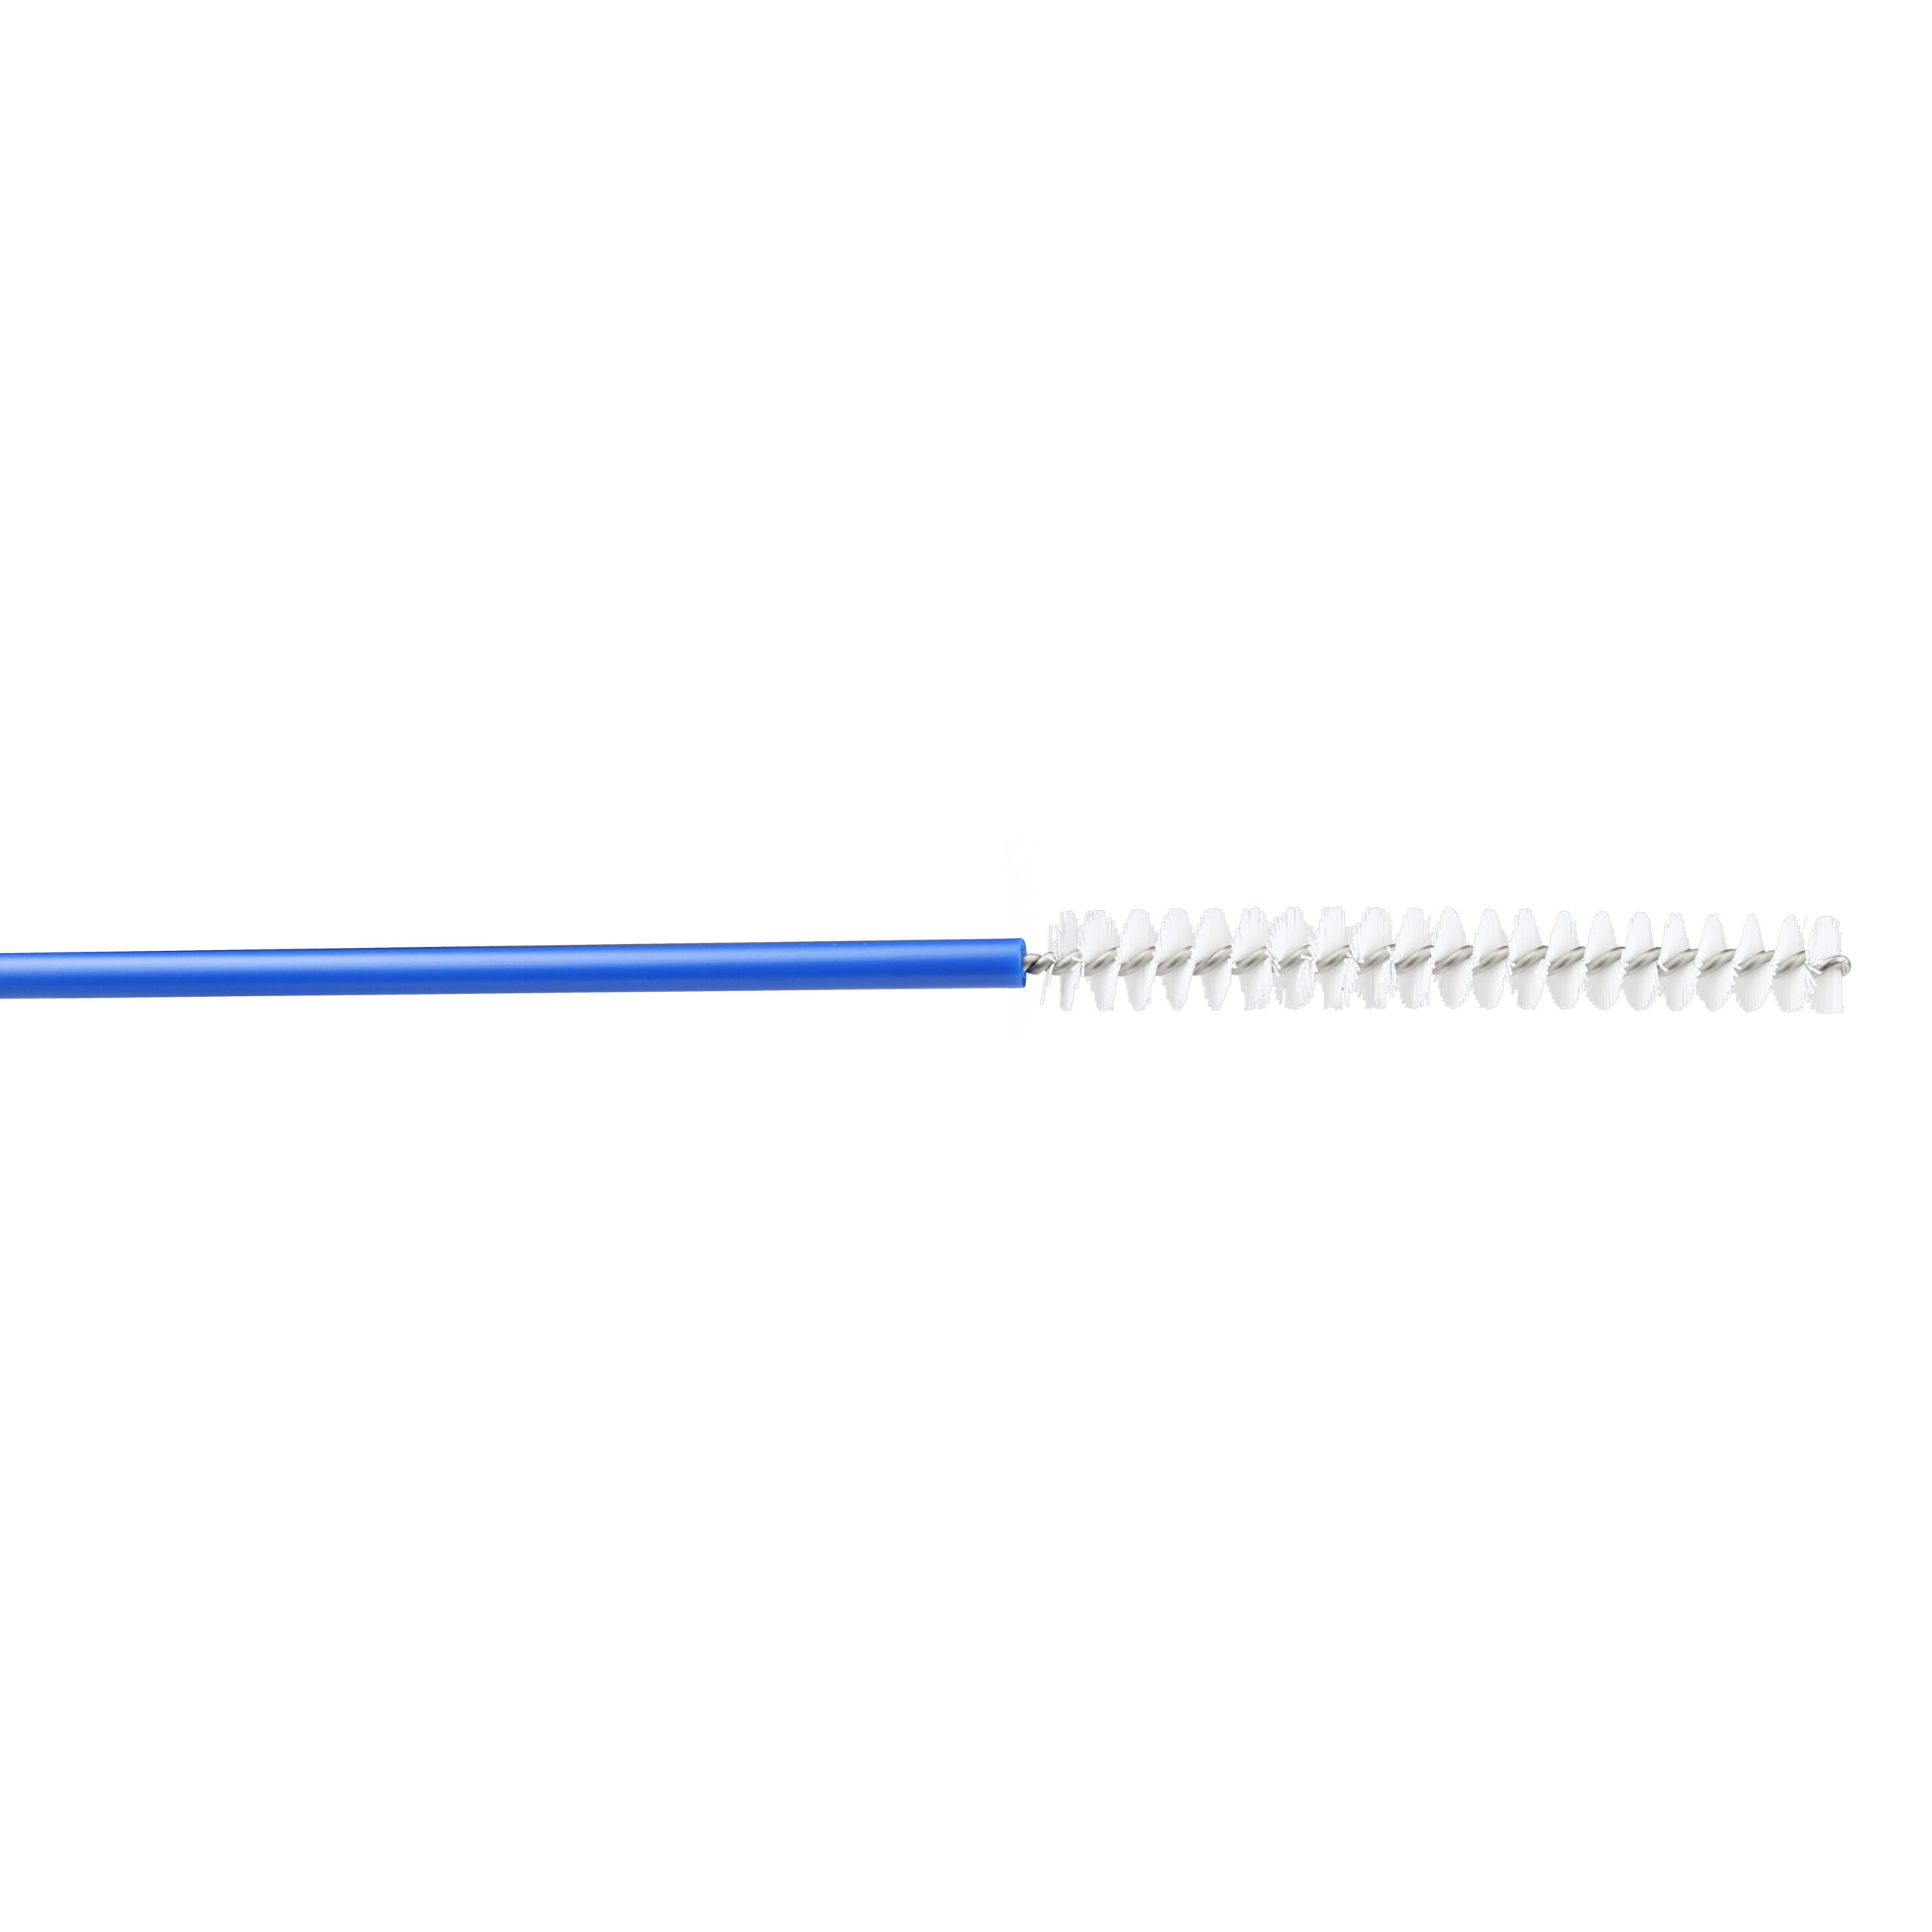 Instrument Care - Instrument Tube Brushes - Healthmark Industries